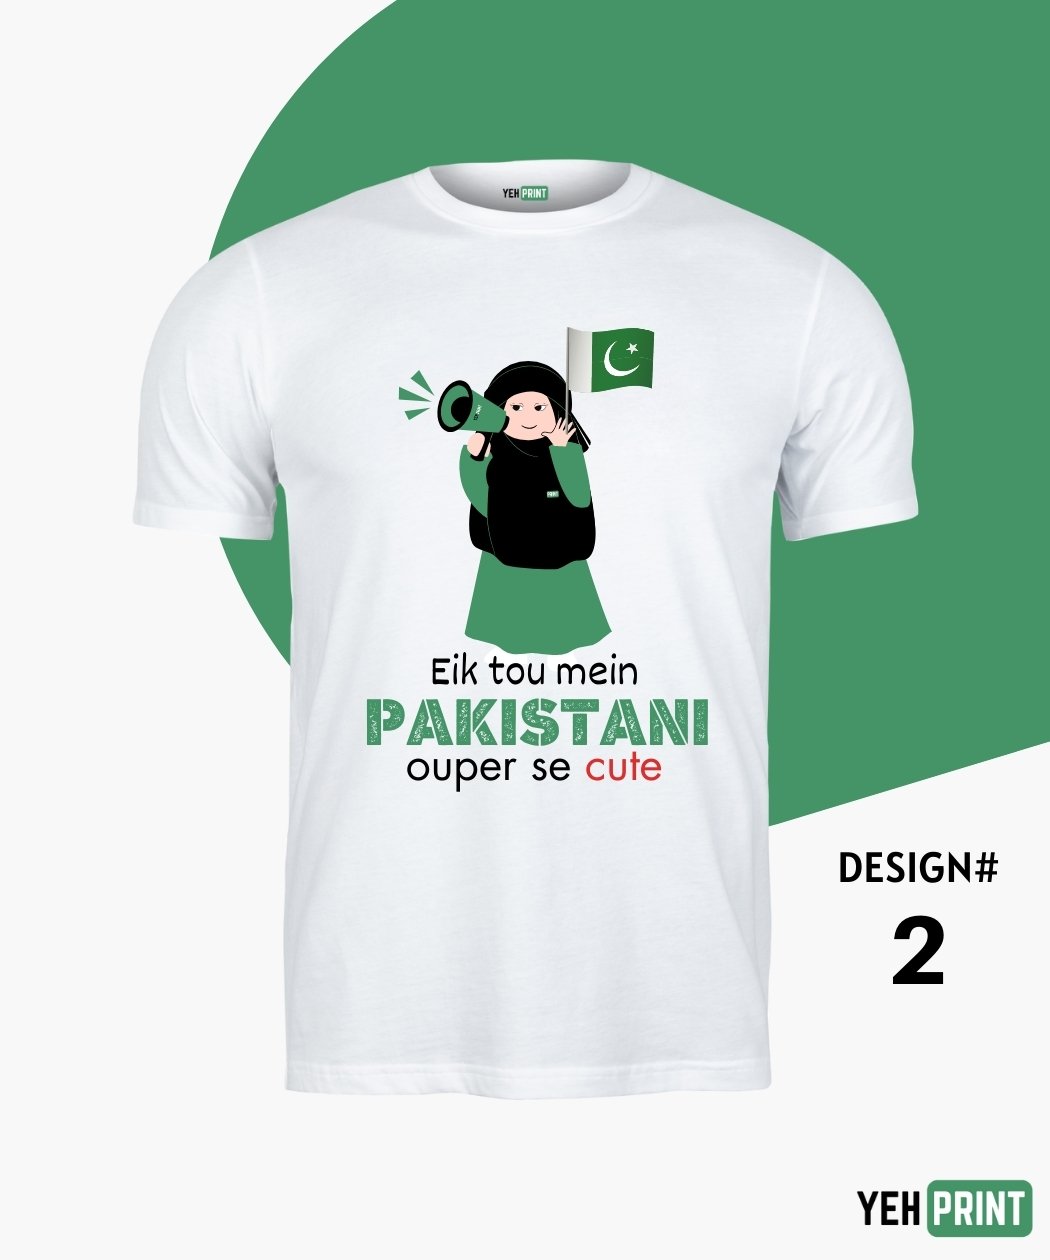 Eik Tou Mein PAKISTANI Ouper Se Cute New 14 August shirts for Girls and Women.